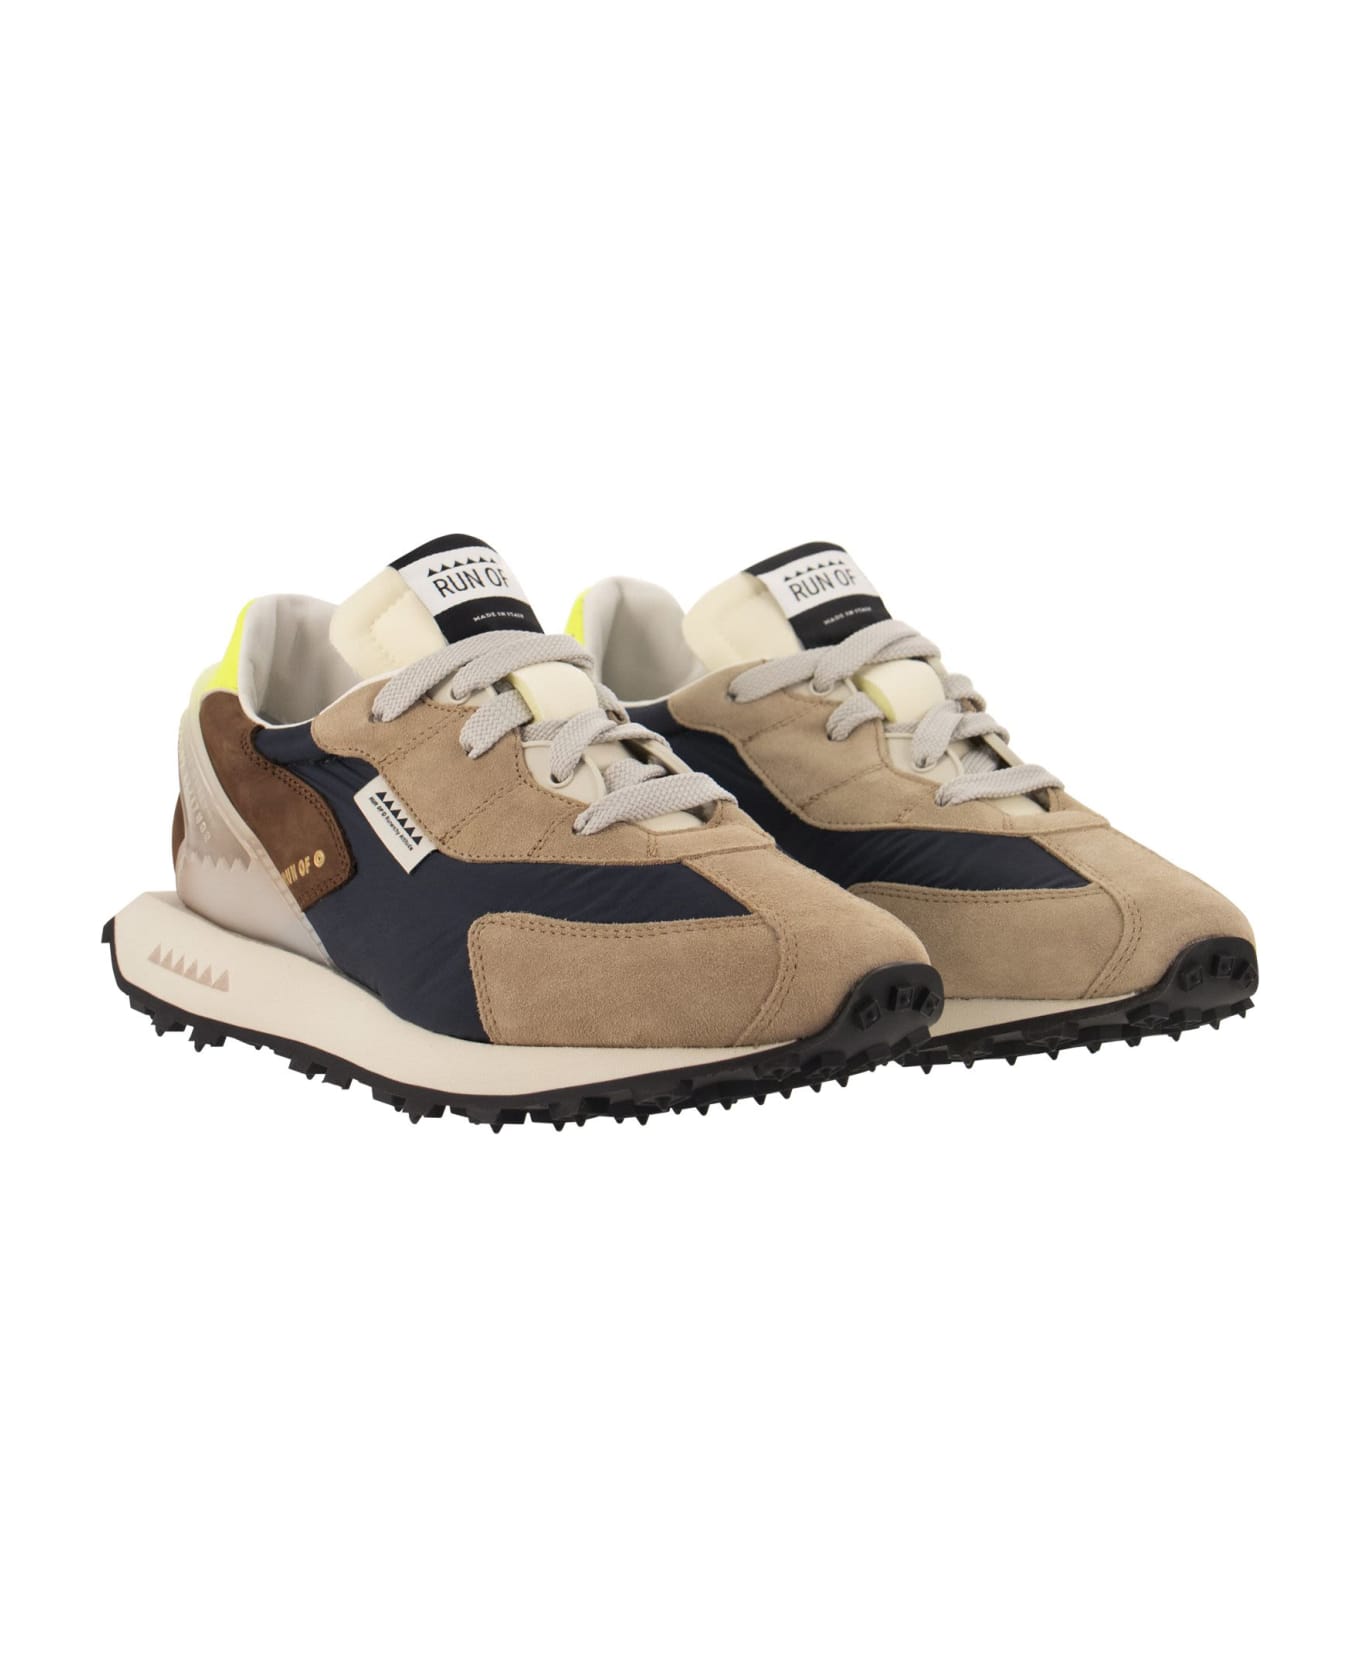 RUN OF Barrio M - Sneakers Suede, Canvas And Leather - Blue/beige